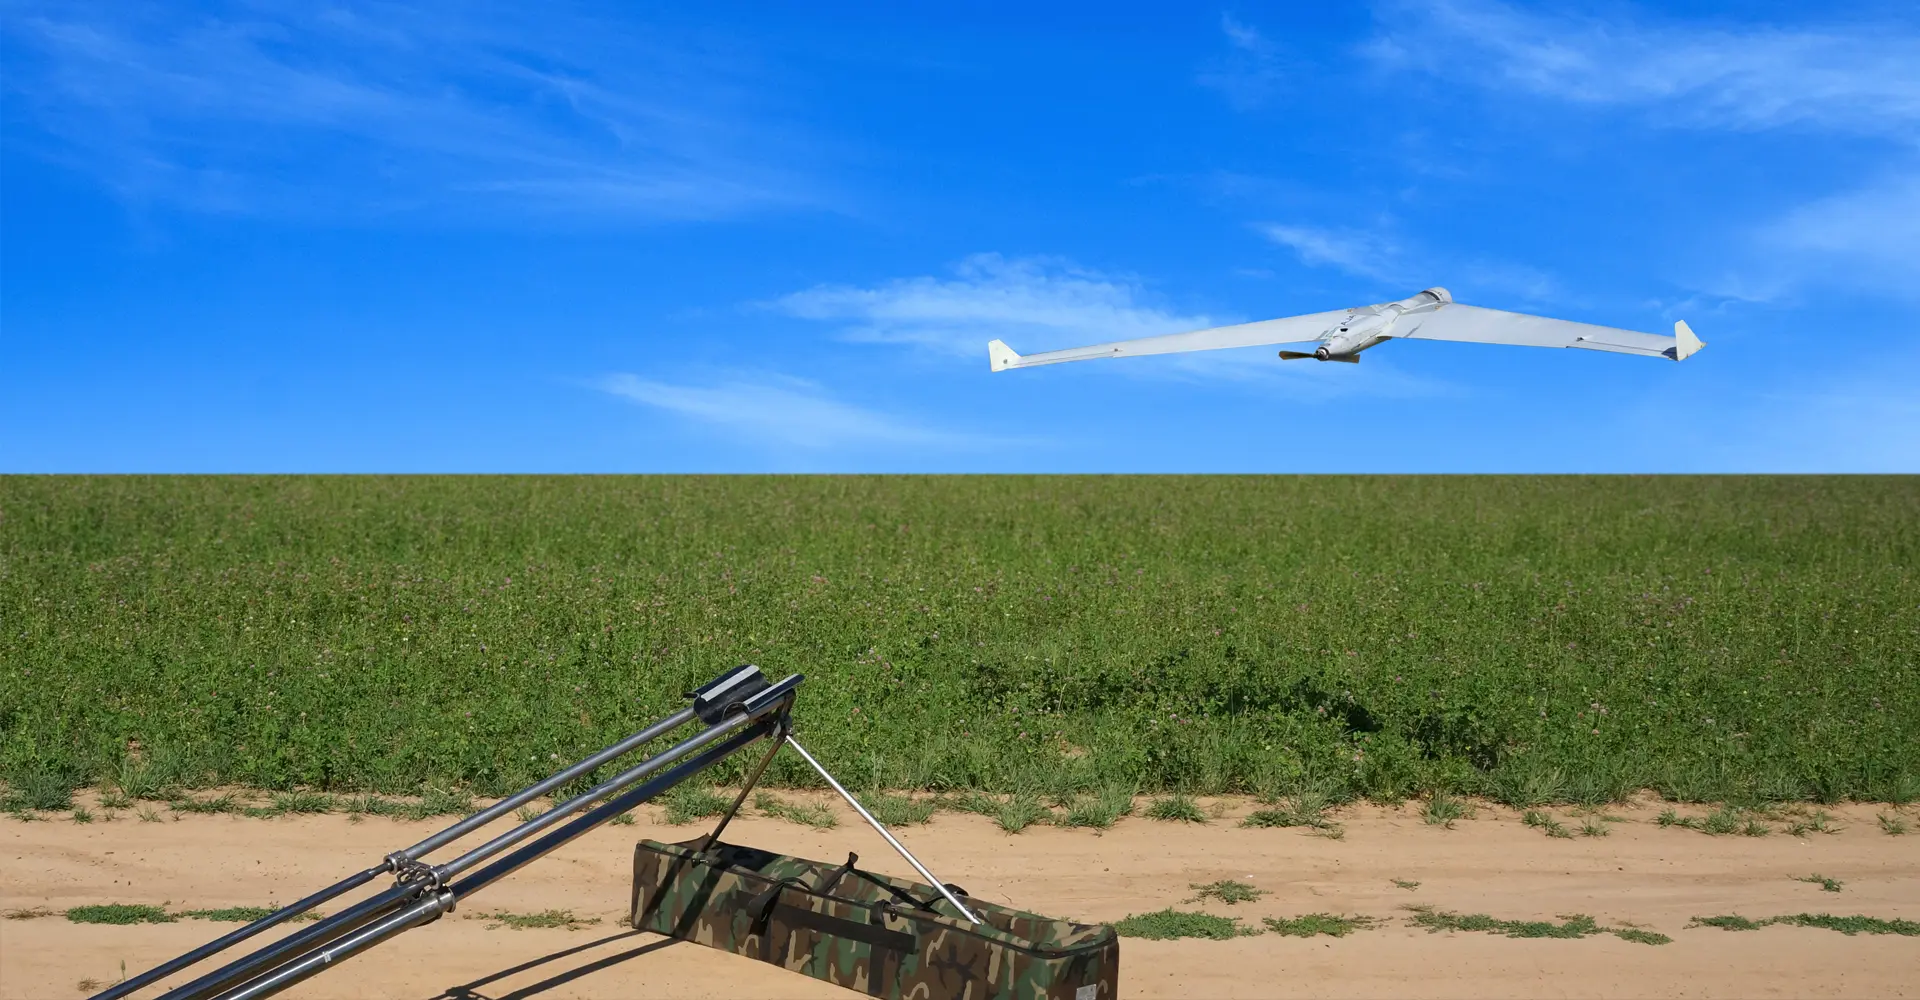 Pilot operation of ZALA unmanned systems for methane detection